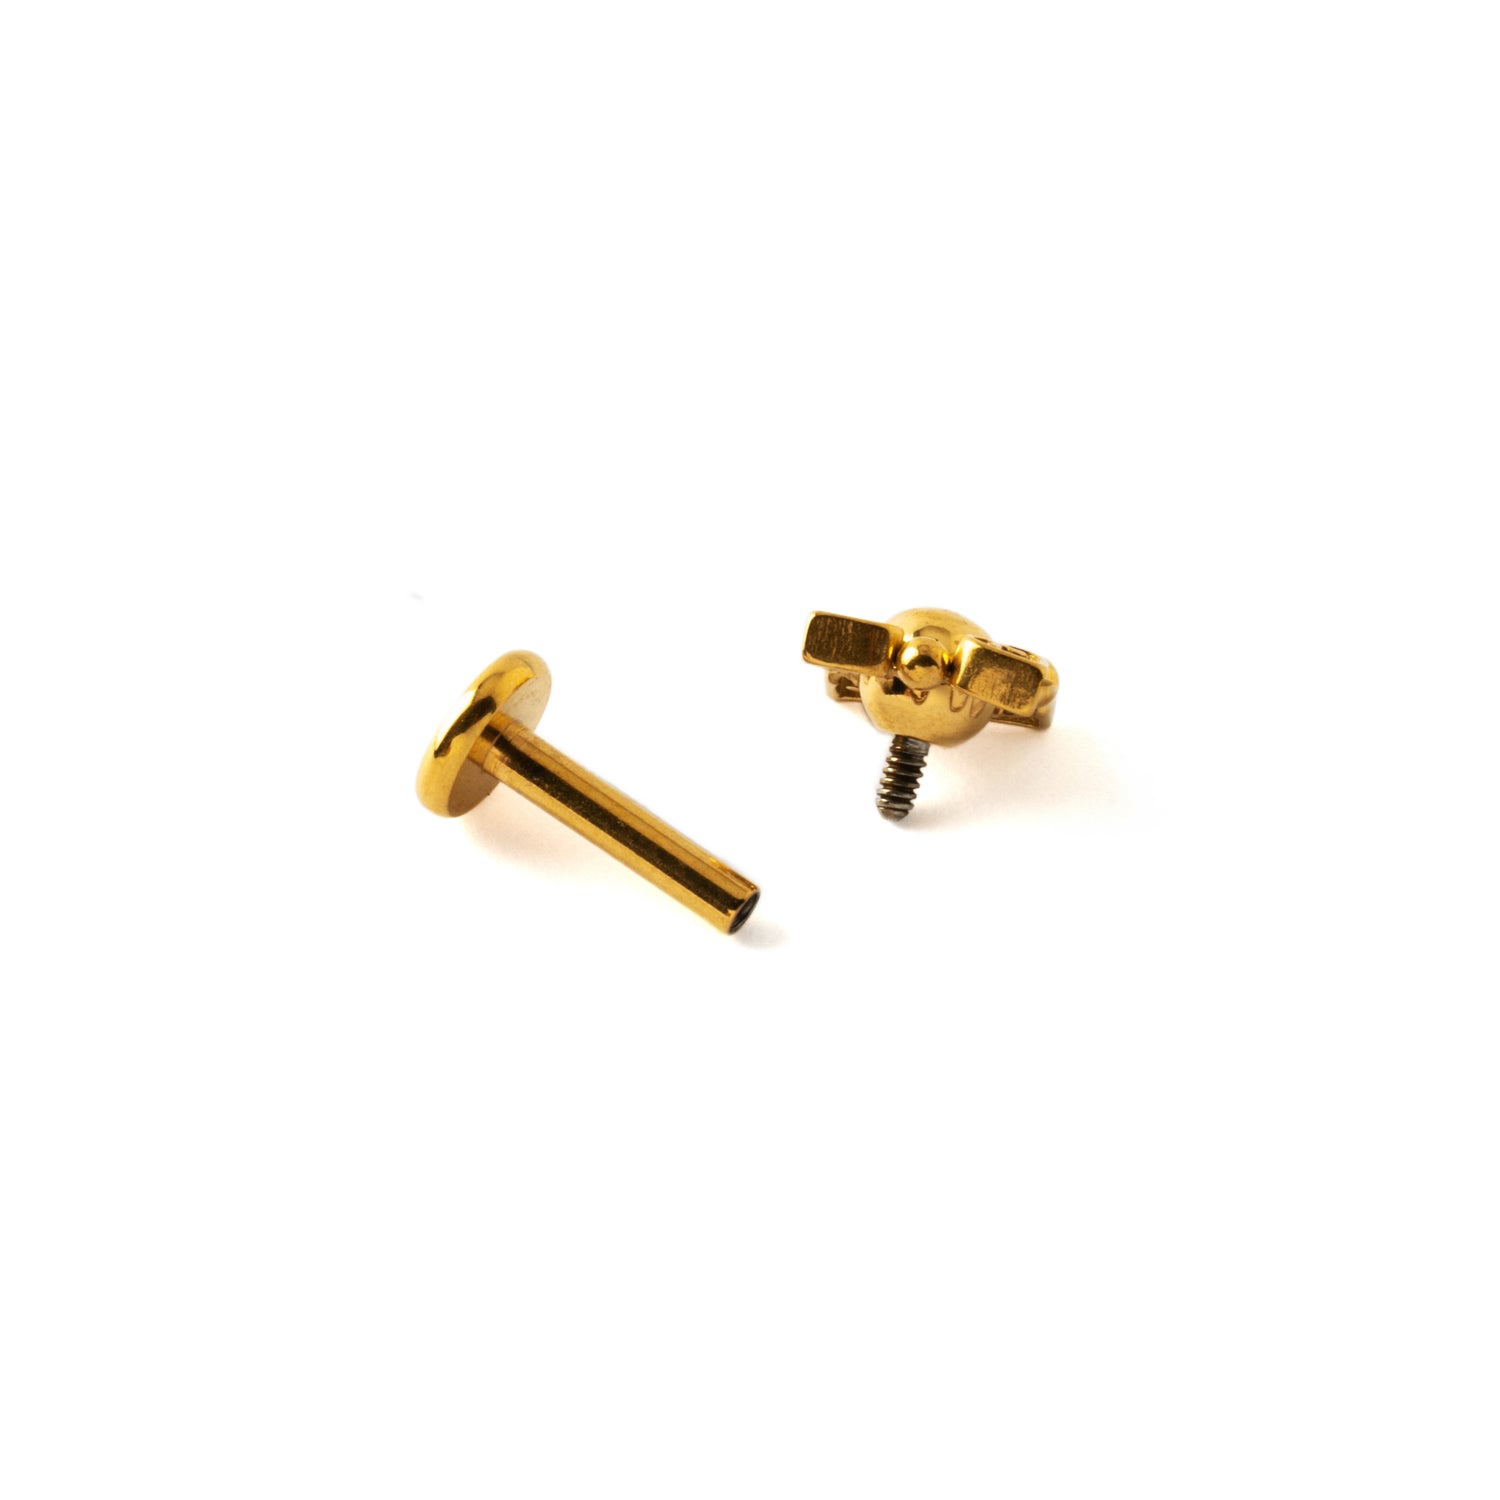 Neptune Gold surgical steel internally threaded Labret stud open mode view